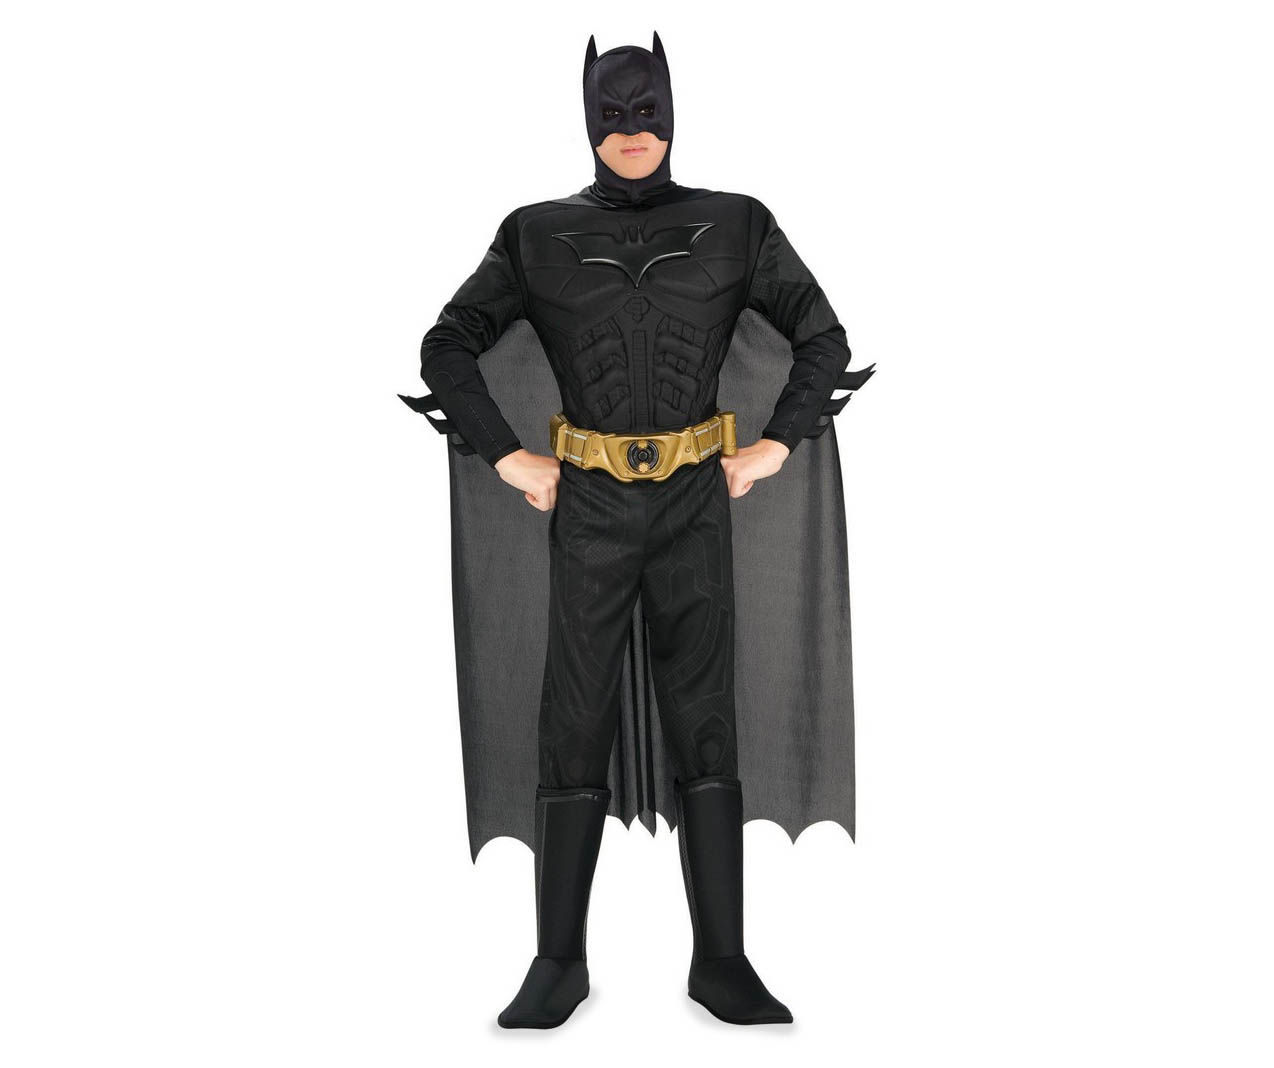 Adult Size M The Dark Knight Batman Deluxe Muscle Chest Costume